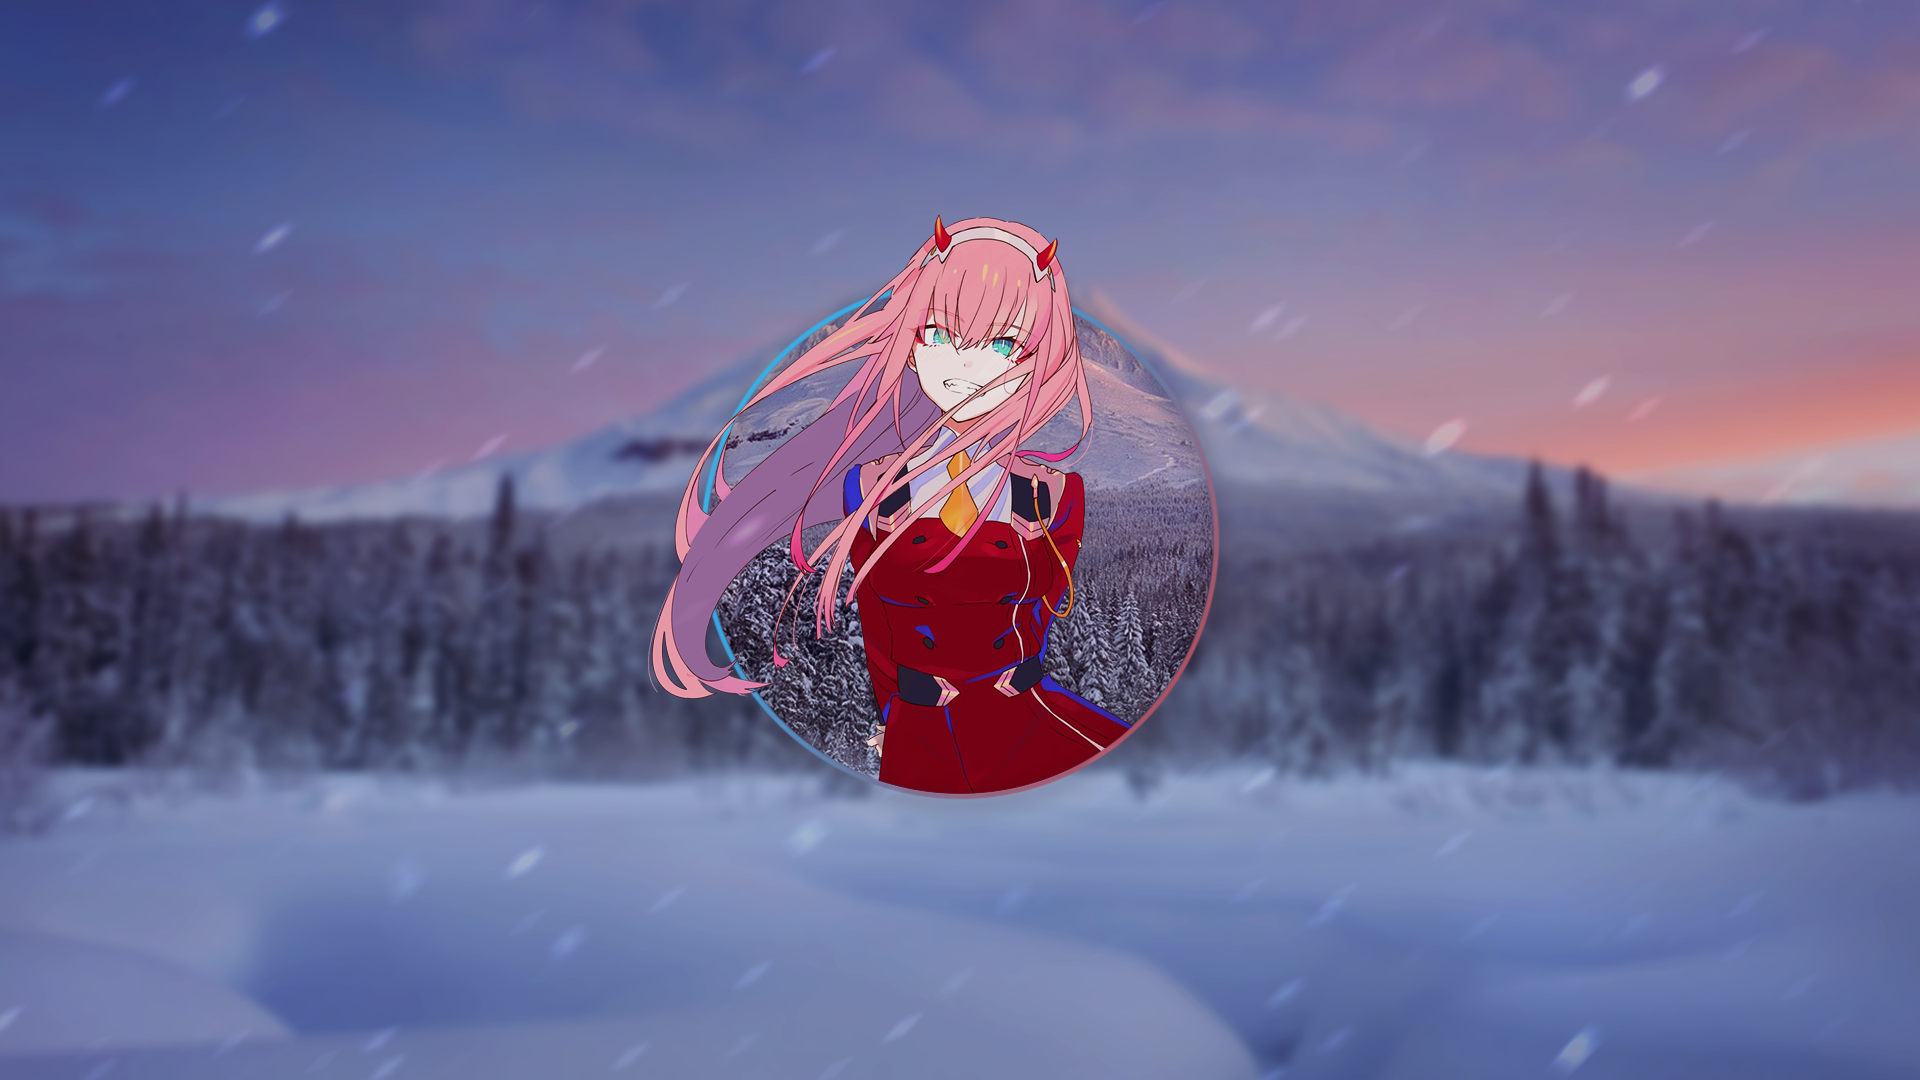 Anime 1920x1080 anime girls Darling in the FranXX Zero Two (Darling in the FranXX) picture-in-picture anime pink hair depth of field snow trees sky clouds